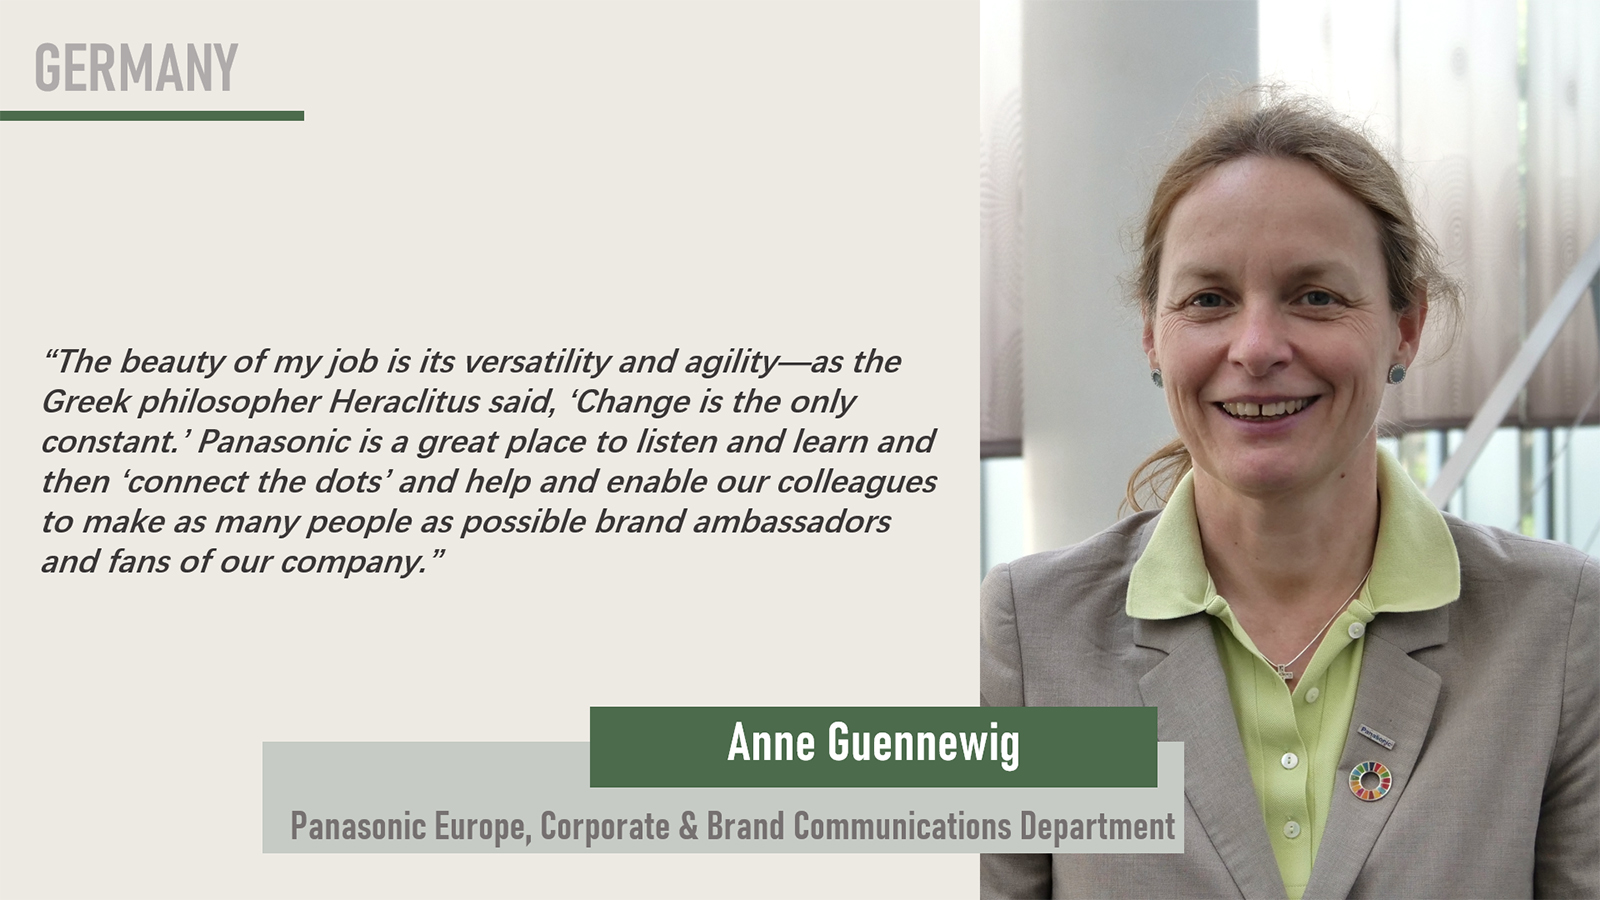 Photo: Anne Guennewig, Panasonic Europe, Corporate & Brand Communications Department